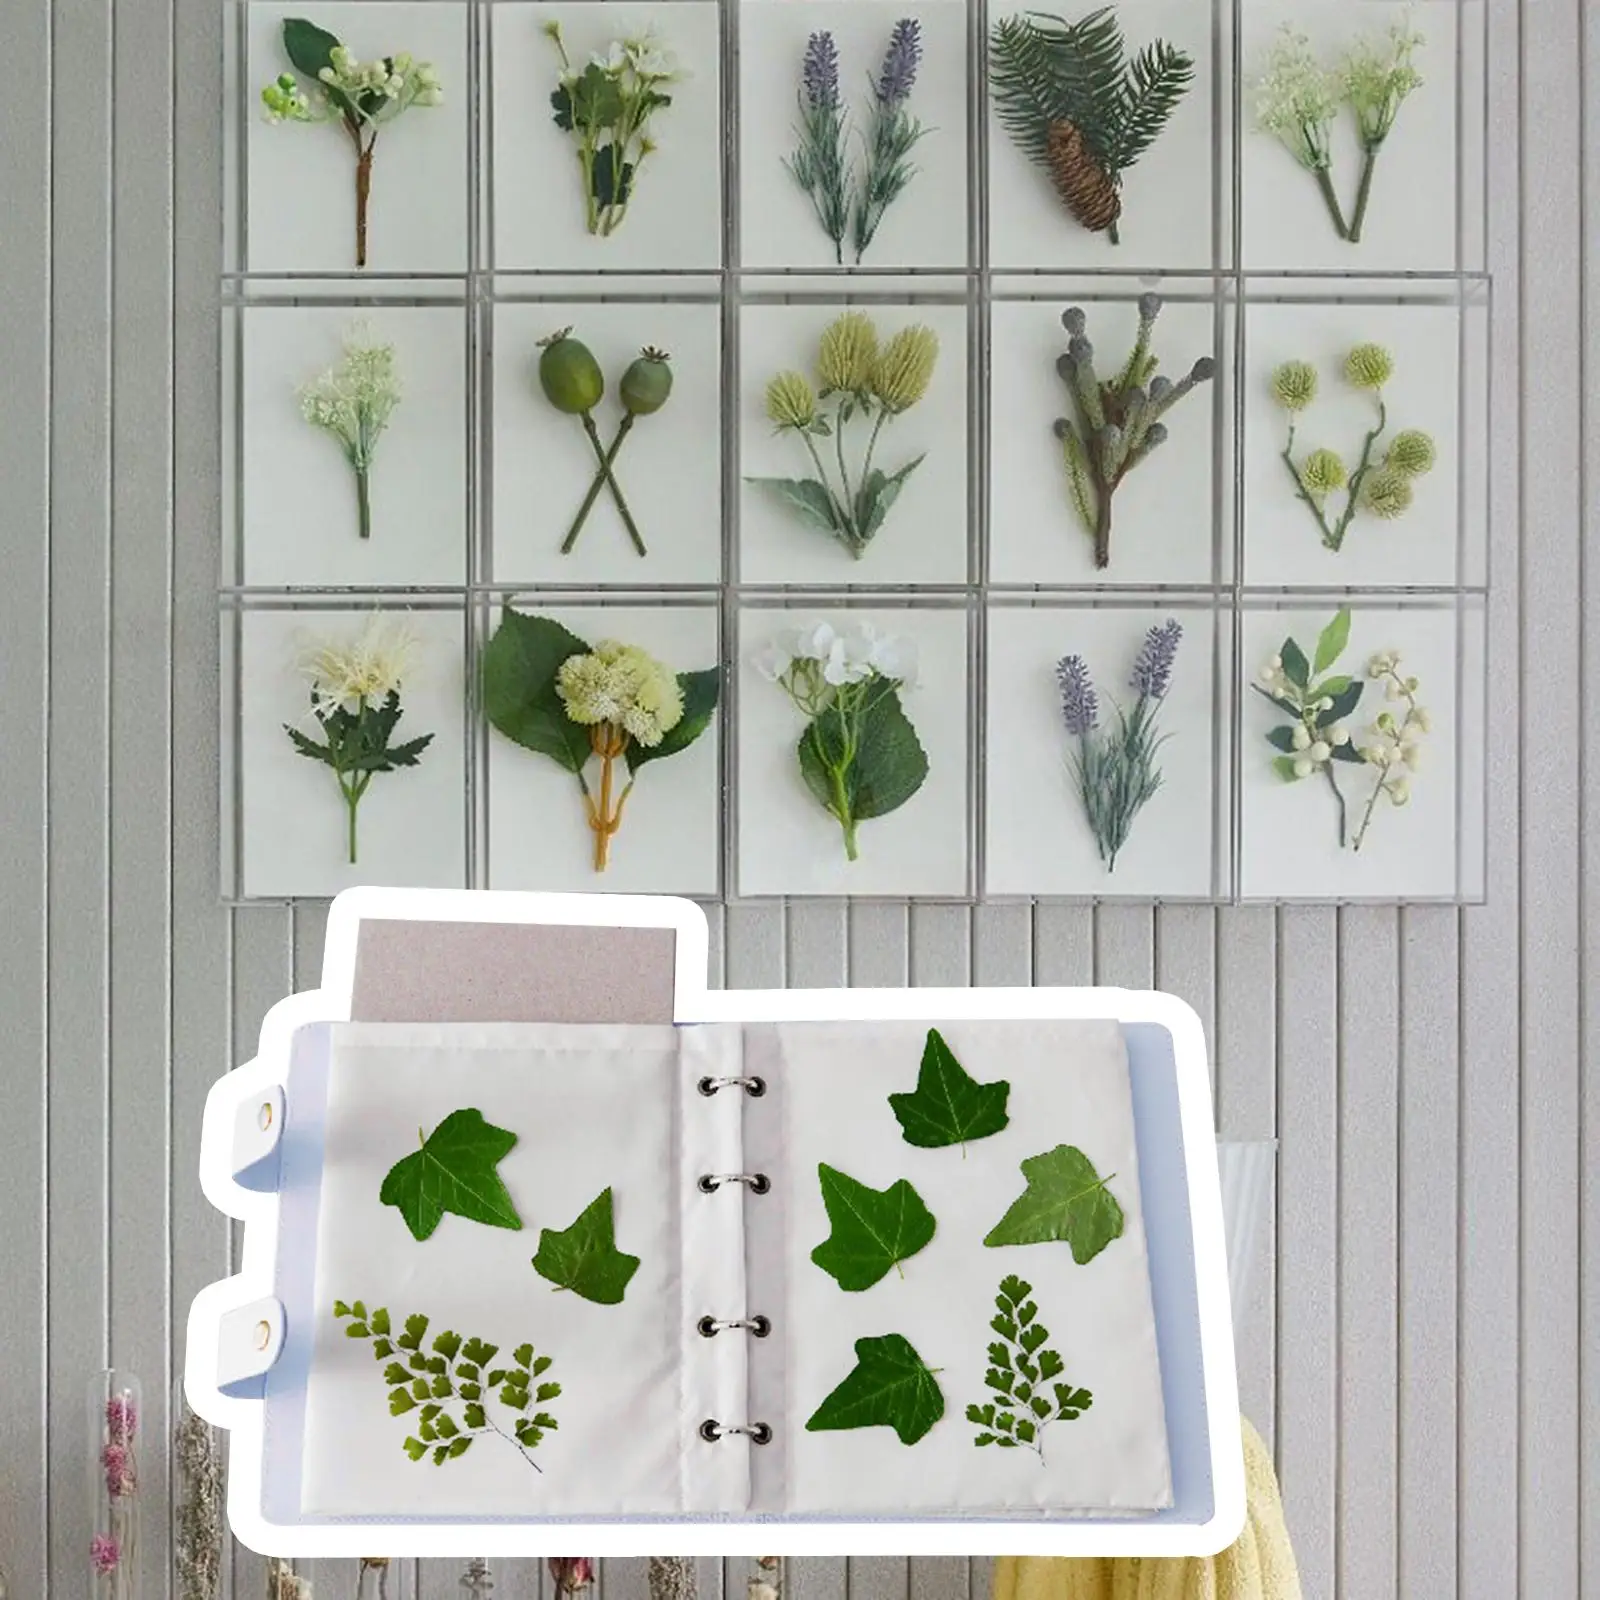 Flower Drying Press Book Cloth Layers DIY Flower Drying Book Plants Press Kit for Craft Projects Scrapbooking Accessory Decor